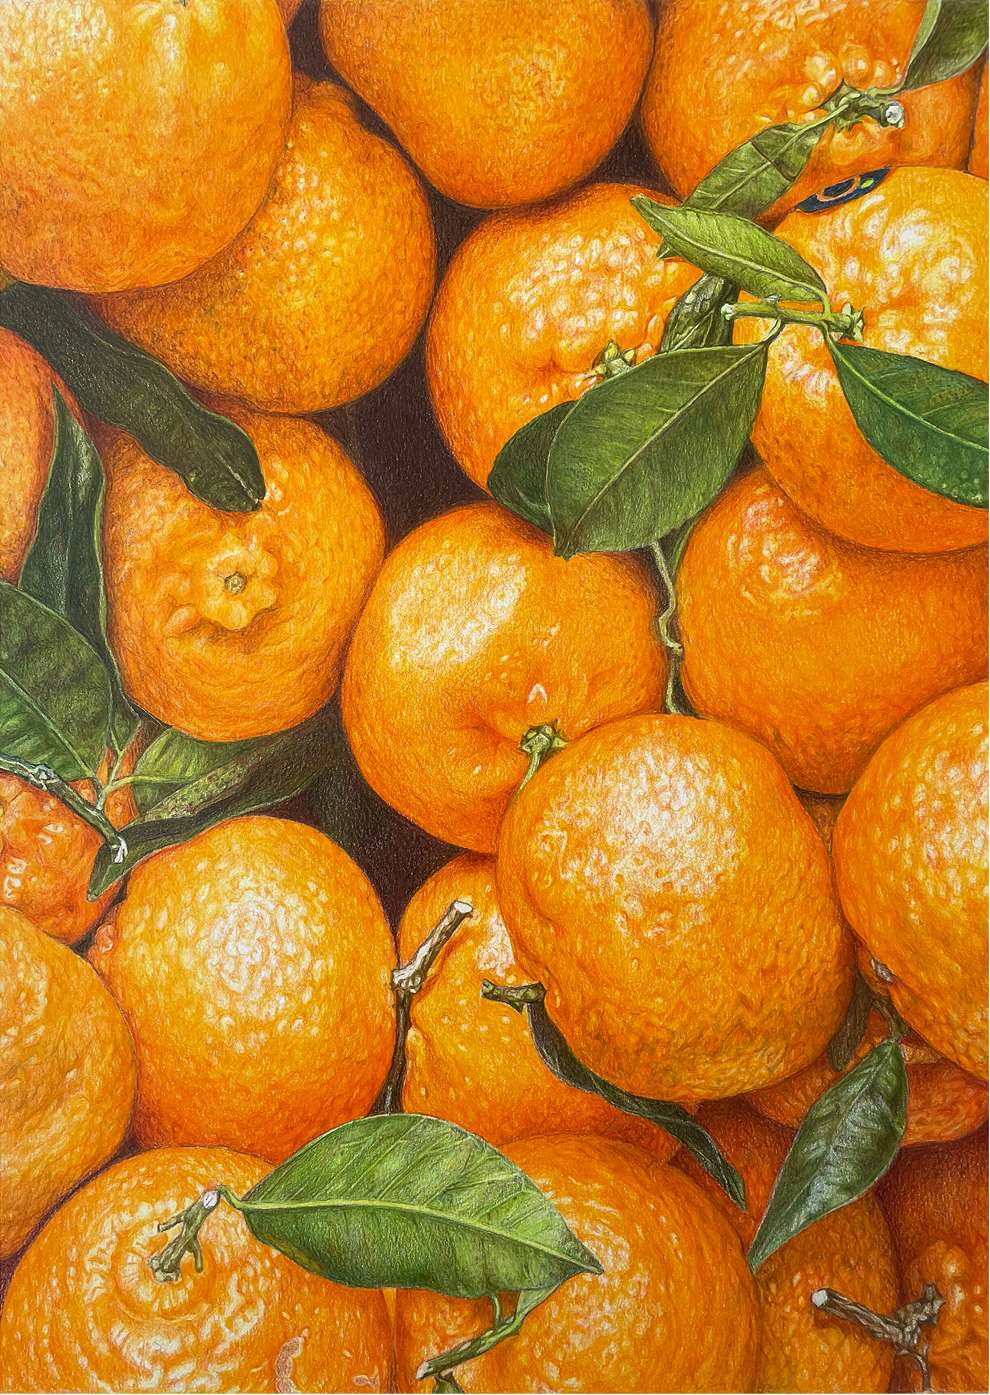 Pencil on Paper, A hand-drawn pencil illustration of the orange fruit, decorated like a pattern.